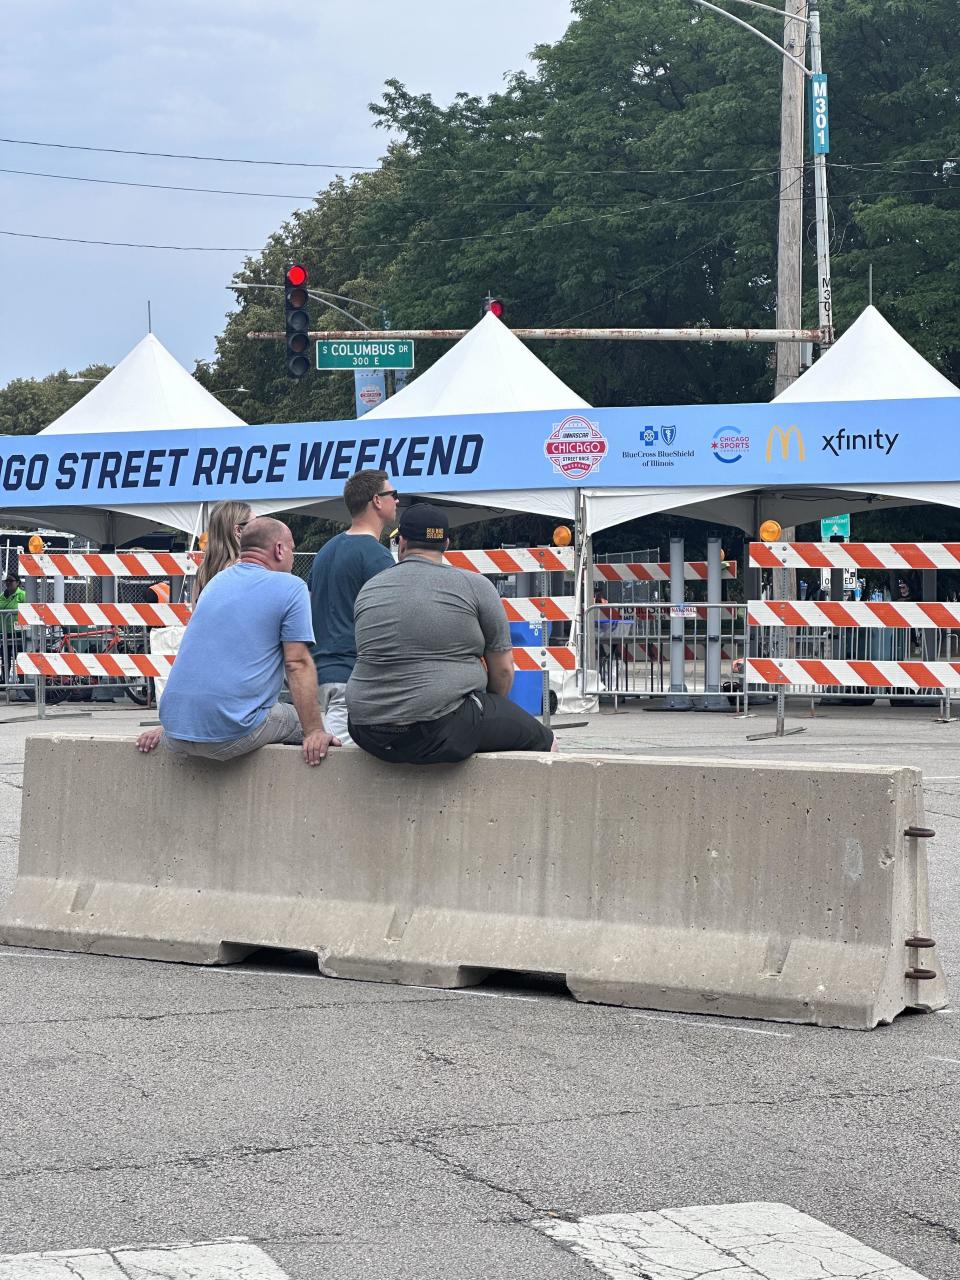 Fans like Daniel Blaufman from New Hampshire and Mike McGowan sit outside the gated entry, hoping to catch a glimpse of the preparations on Friday. / Credit: Analisa Novak/CBS News